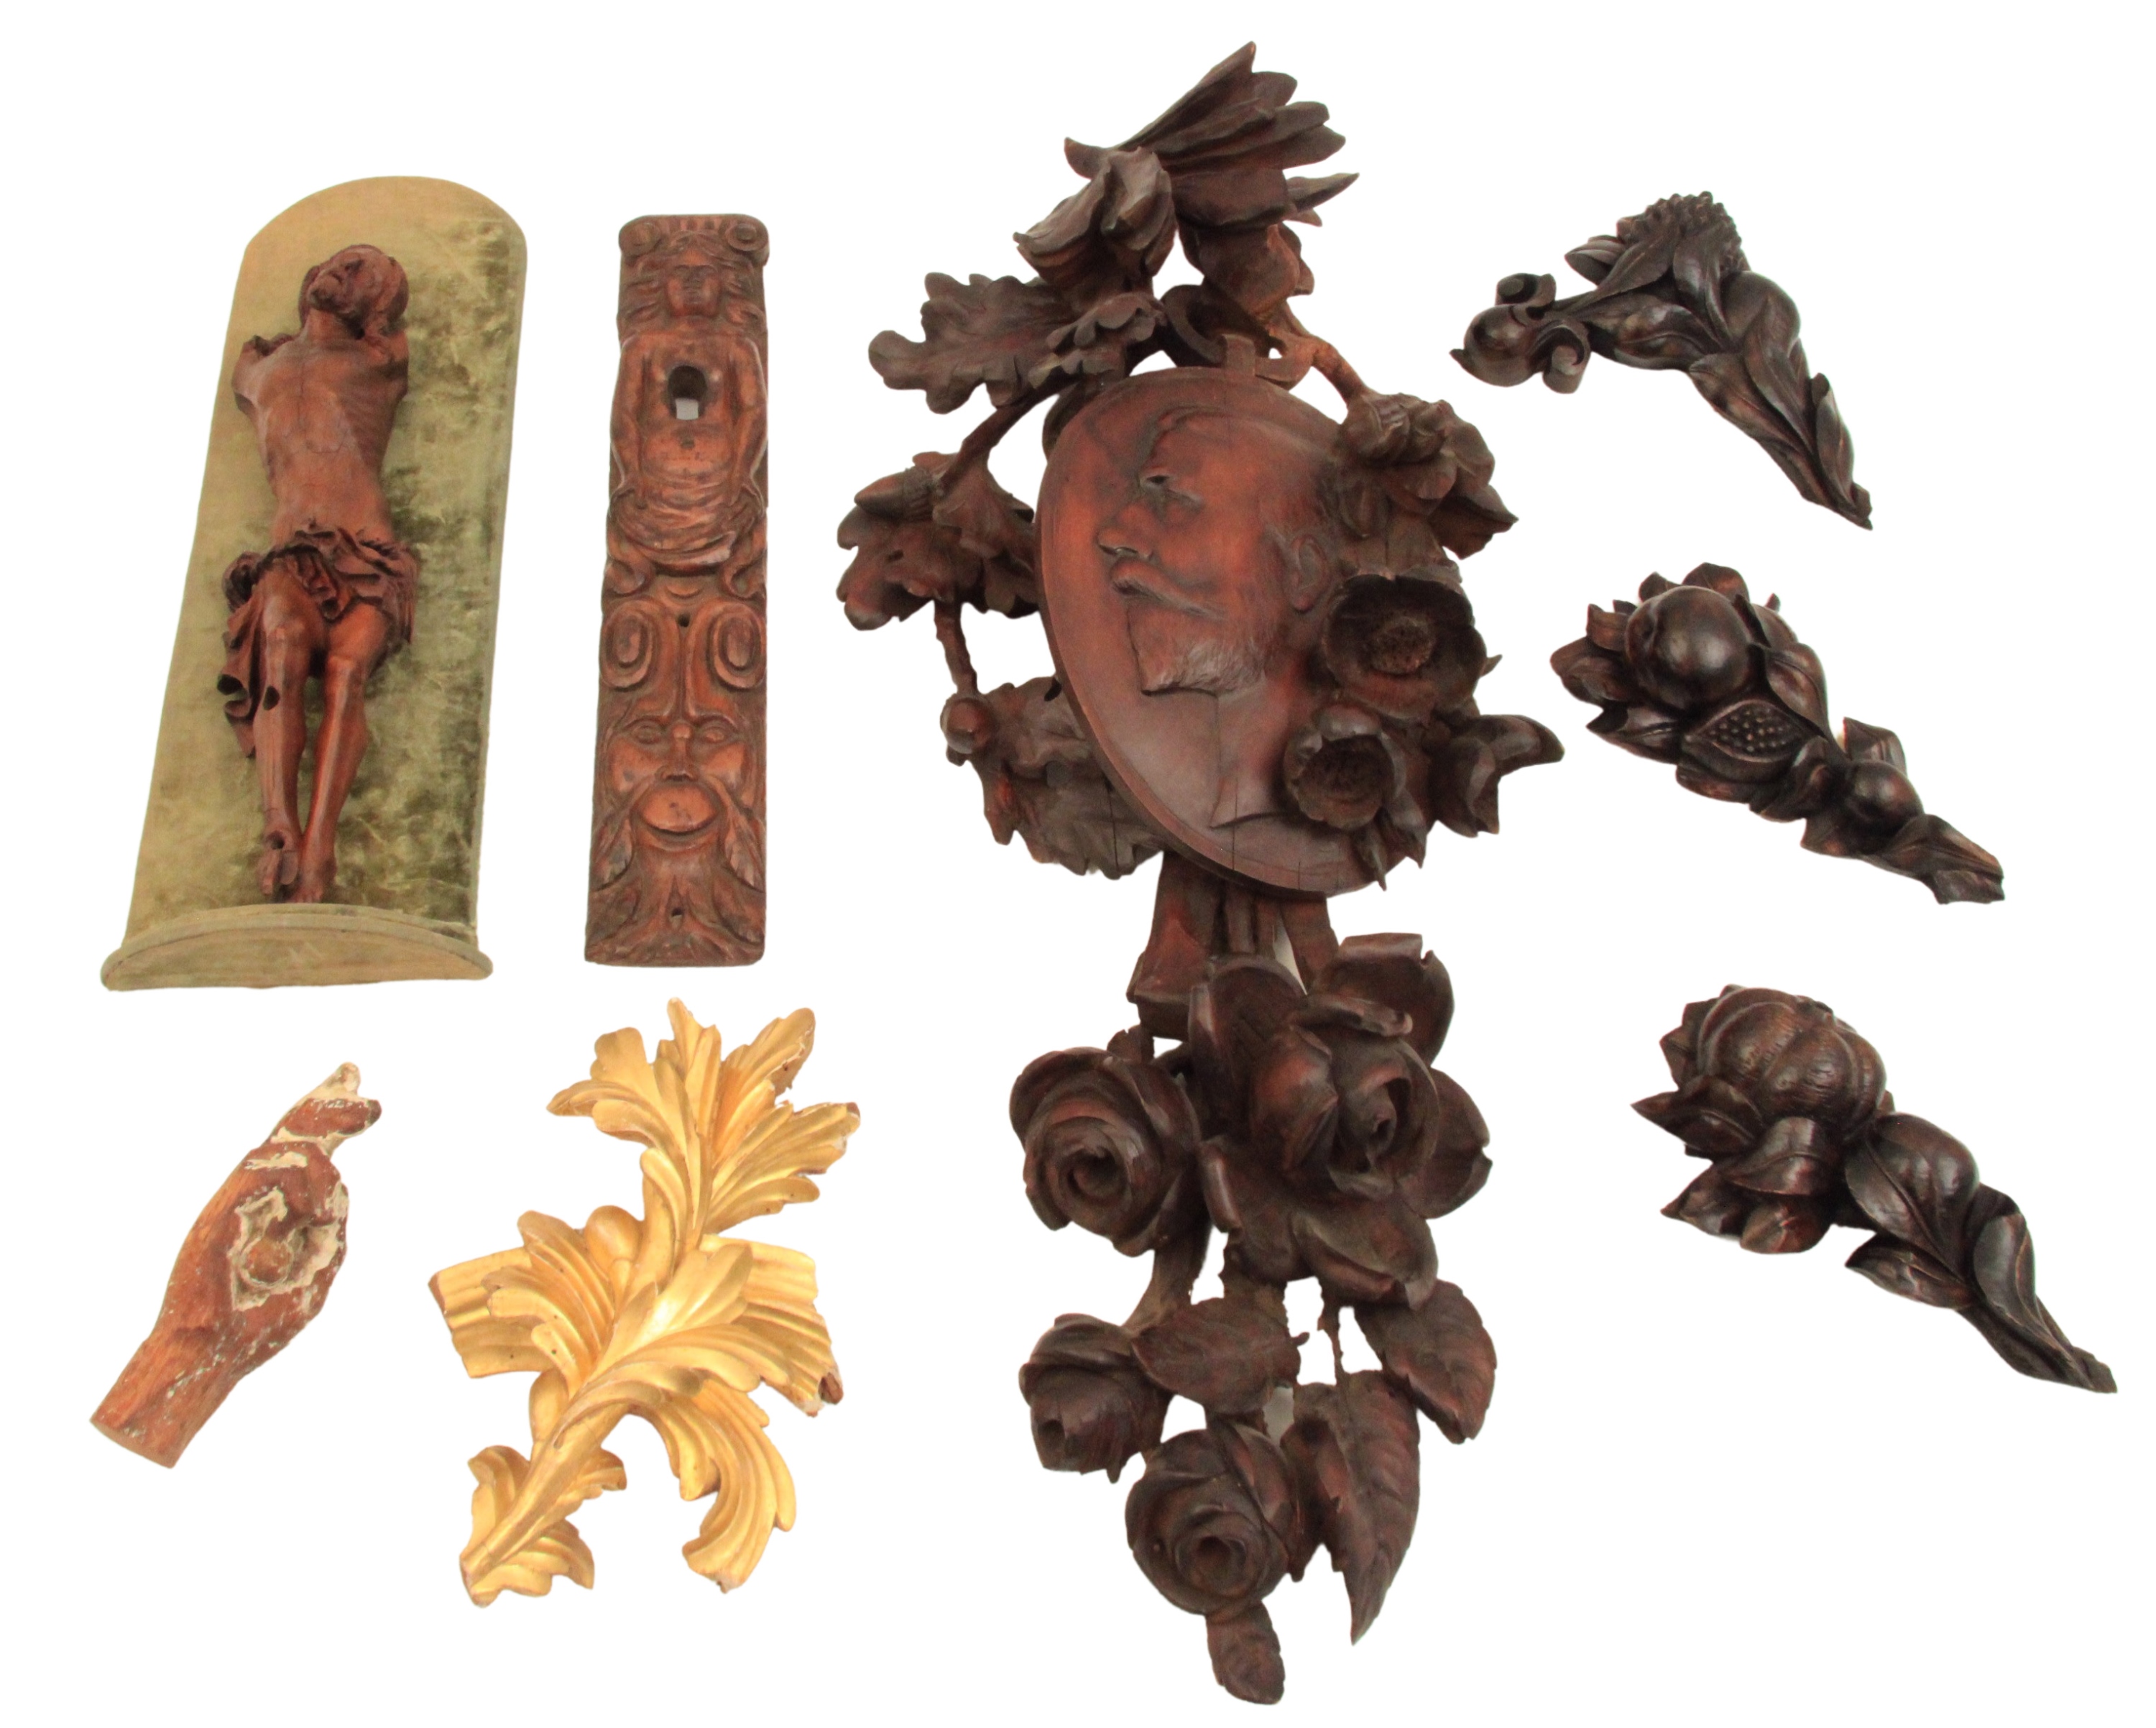 GROUP OF 8 CARVED WOOD ELEMENTS